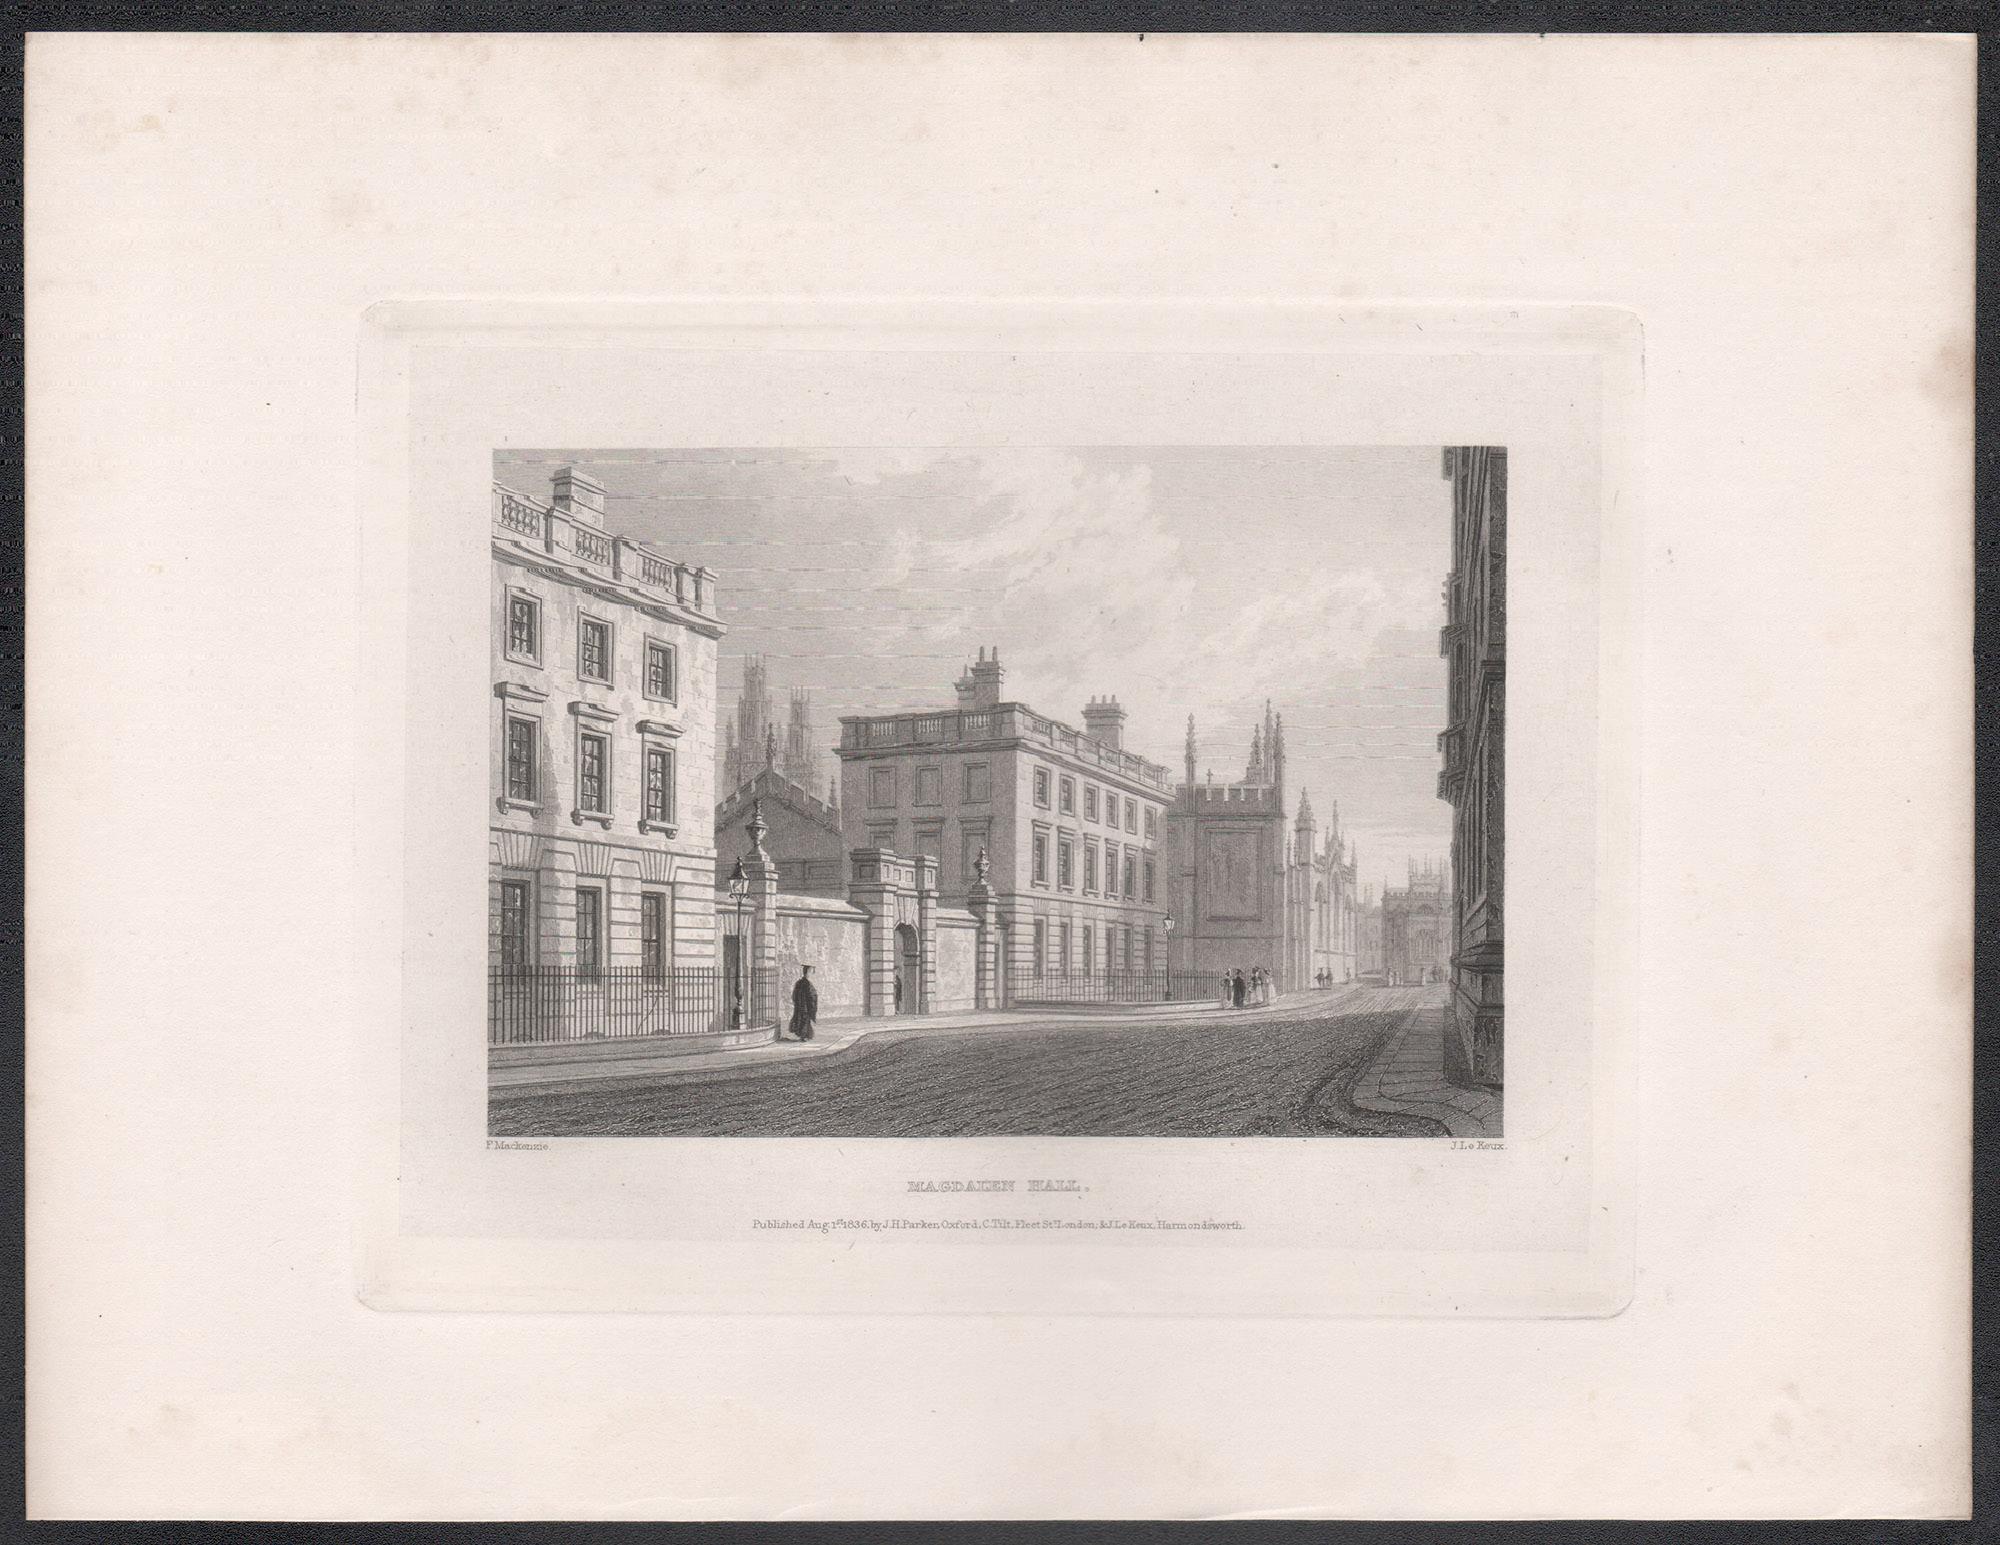 Magdalen Hall. Oxford University. Antique C19th engraving - Print by John Le Keux after Frederick Mackenzie